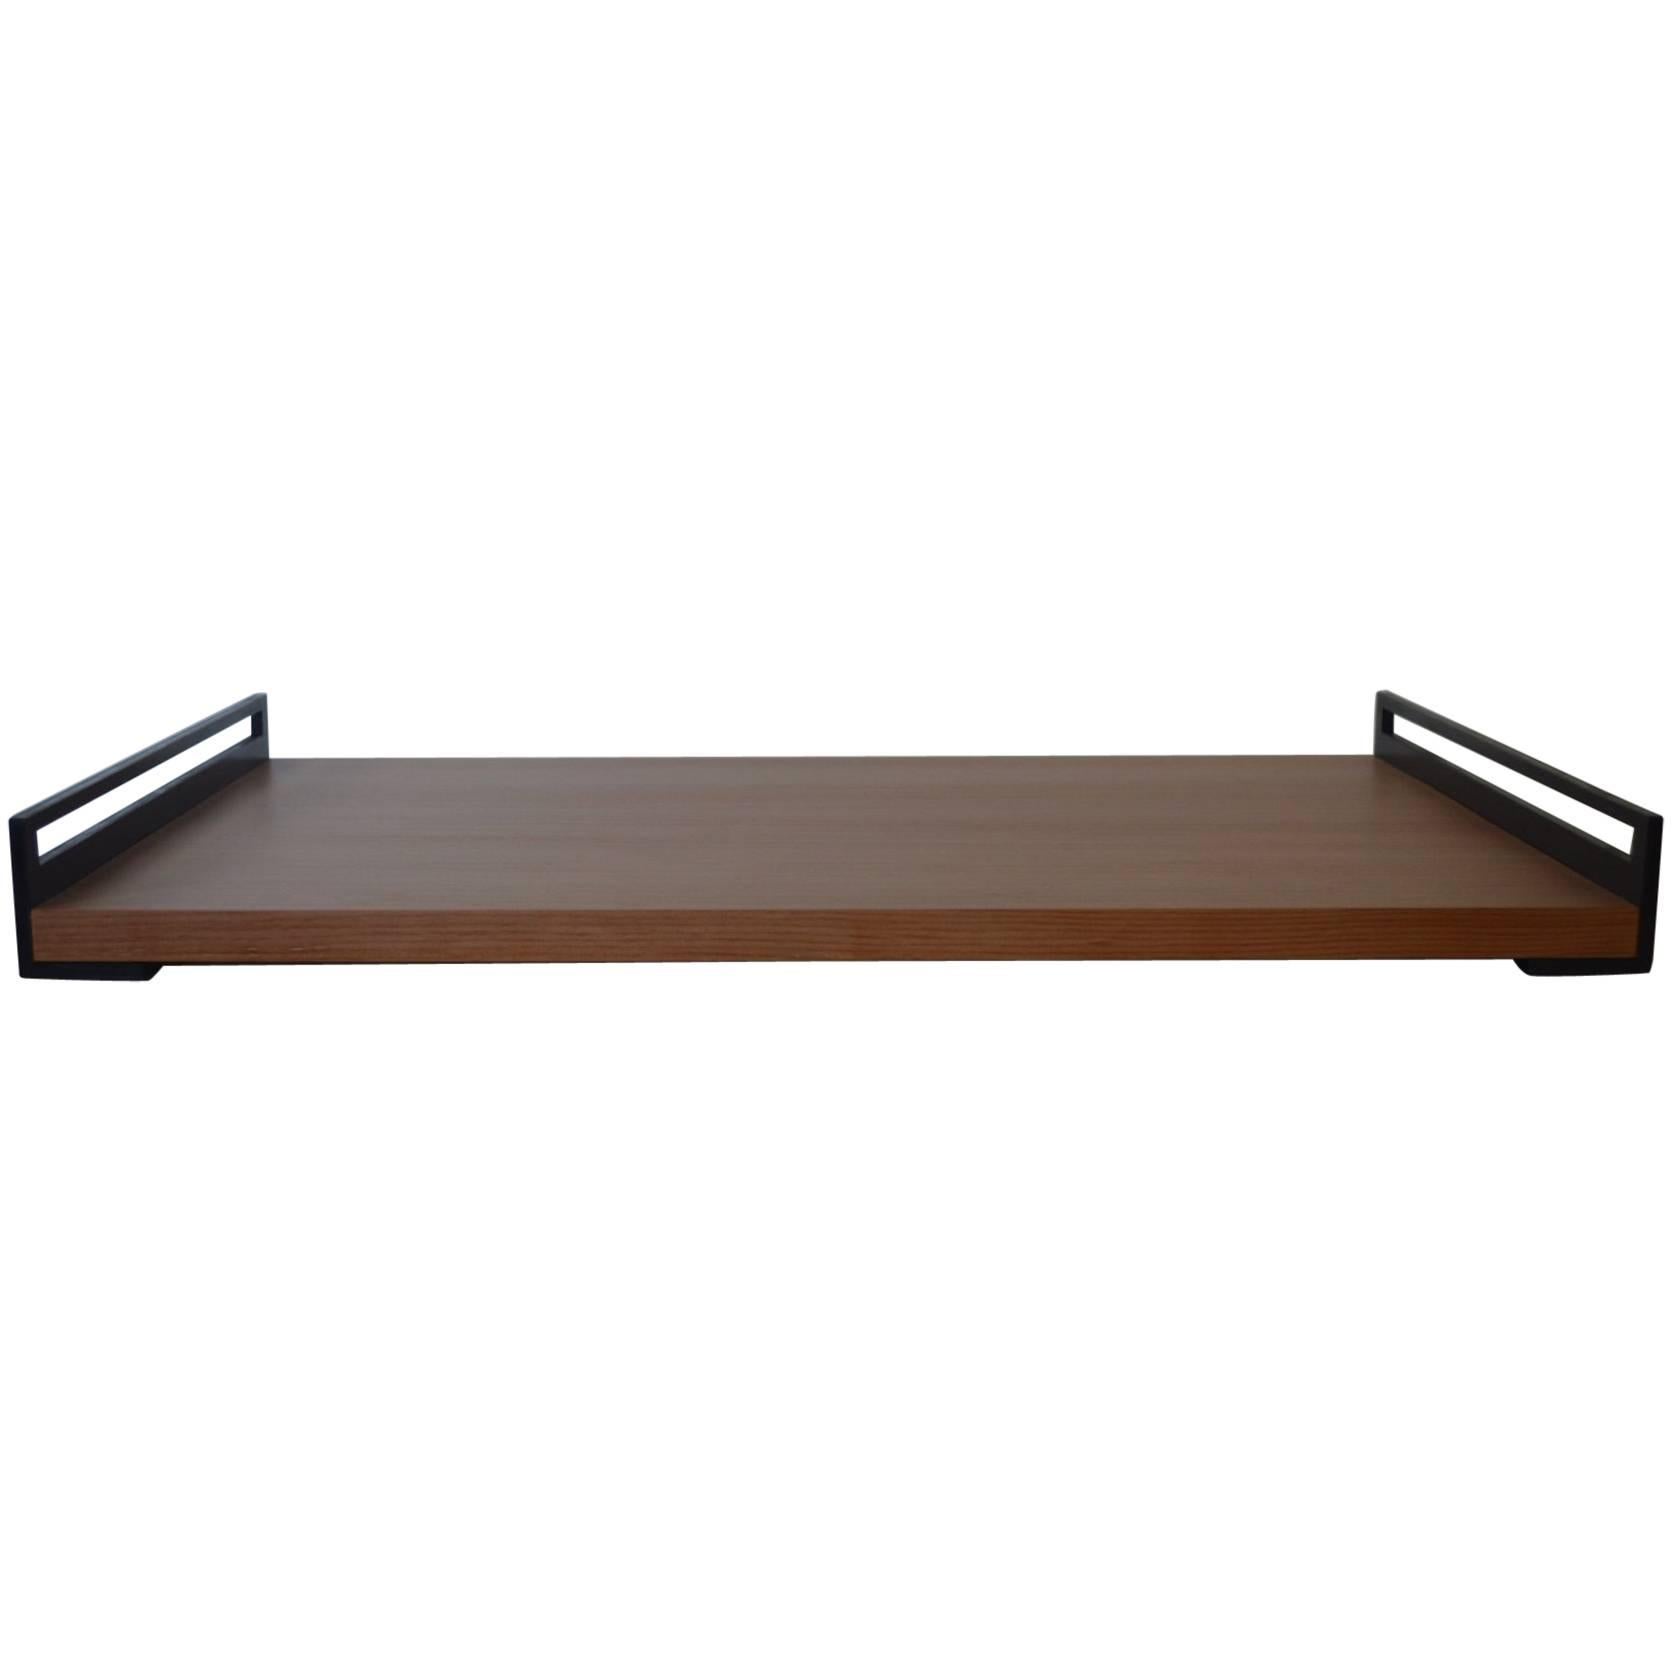 Contemporary Minimalist Blackened Steel and Wood Service Tray-IN STOCK